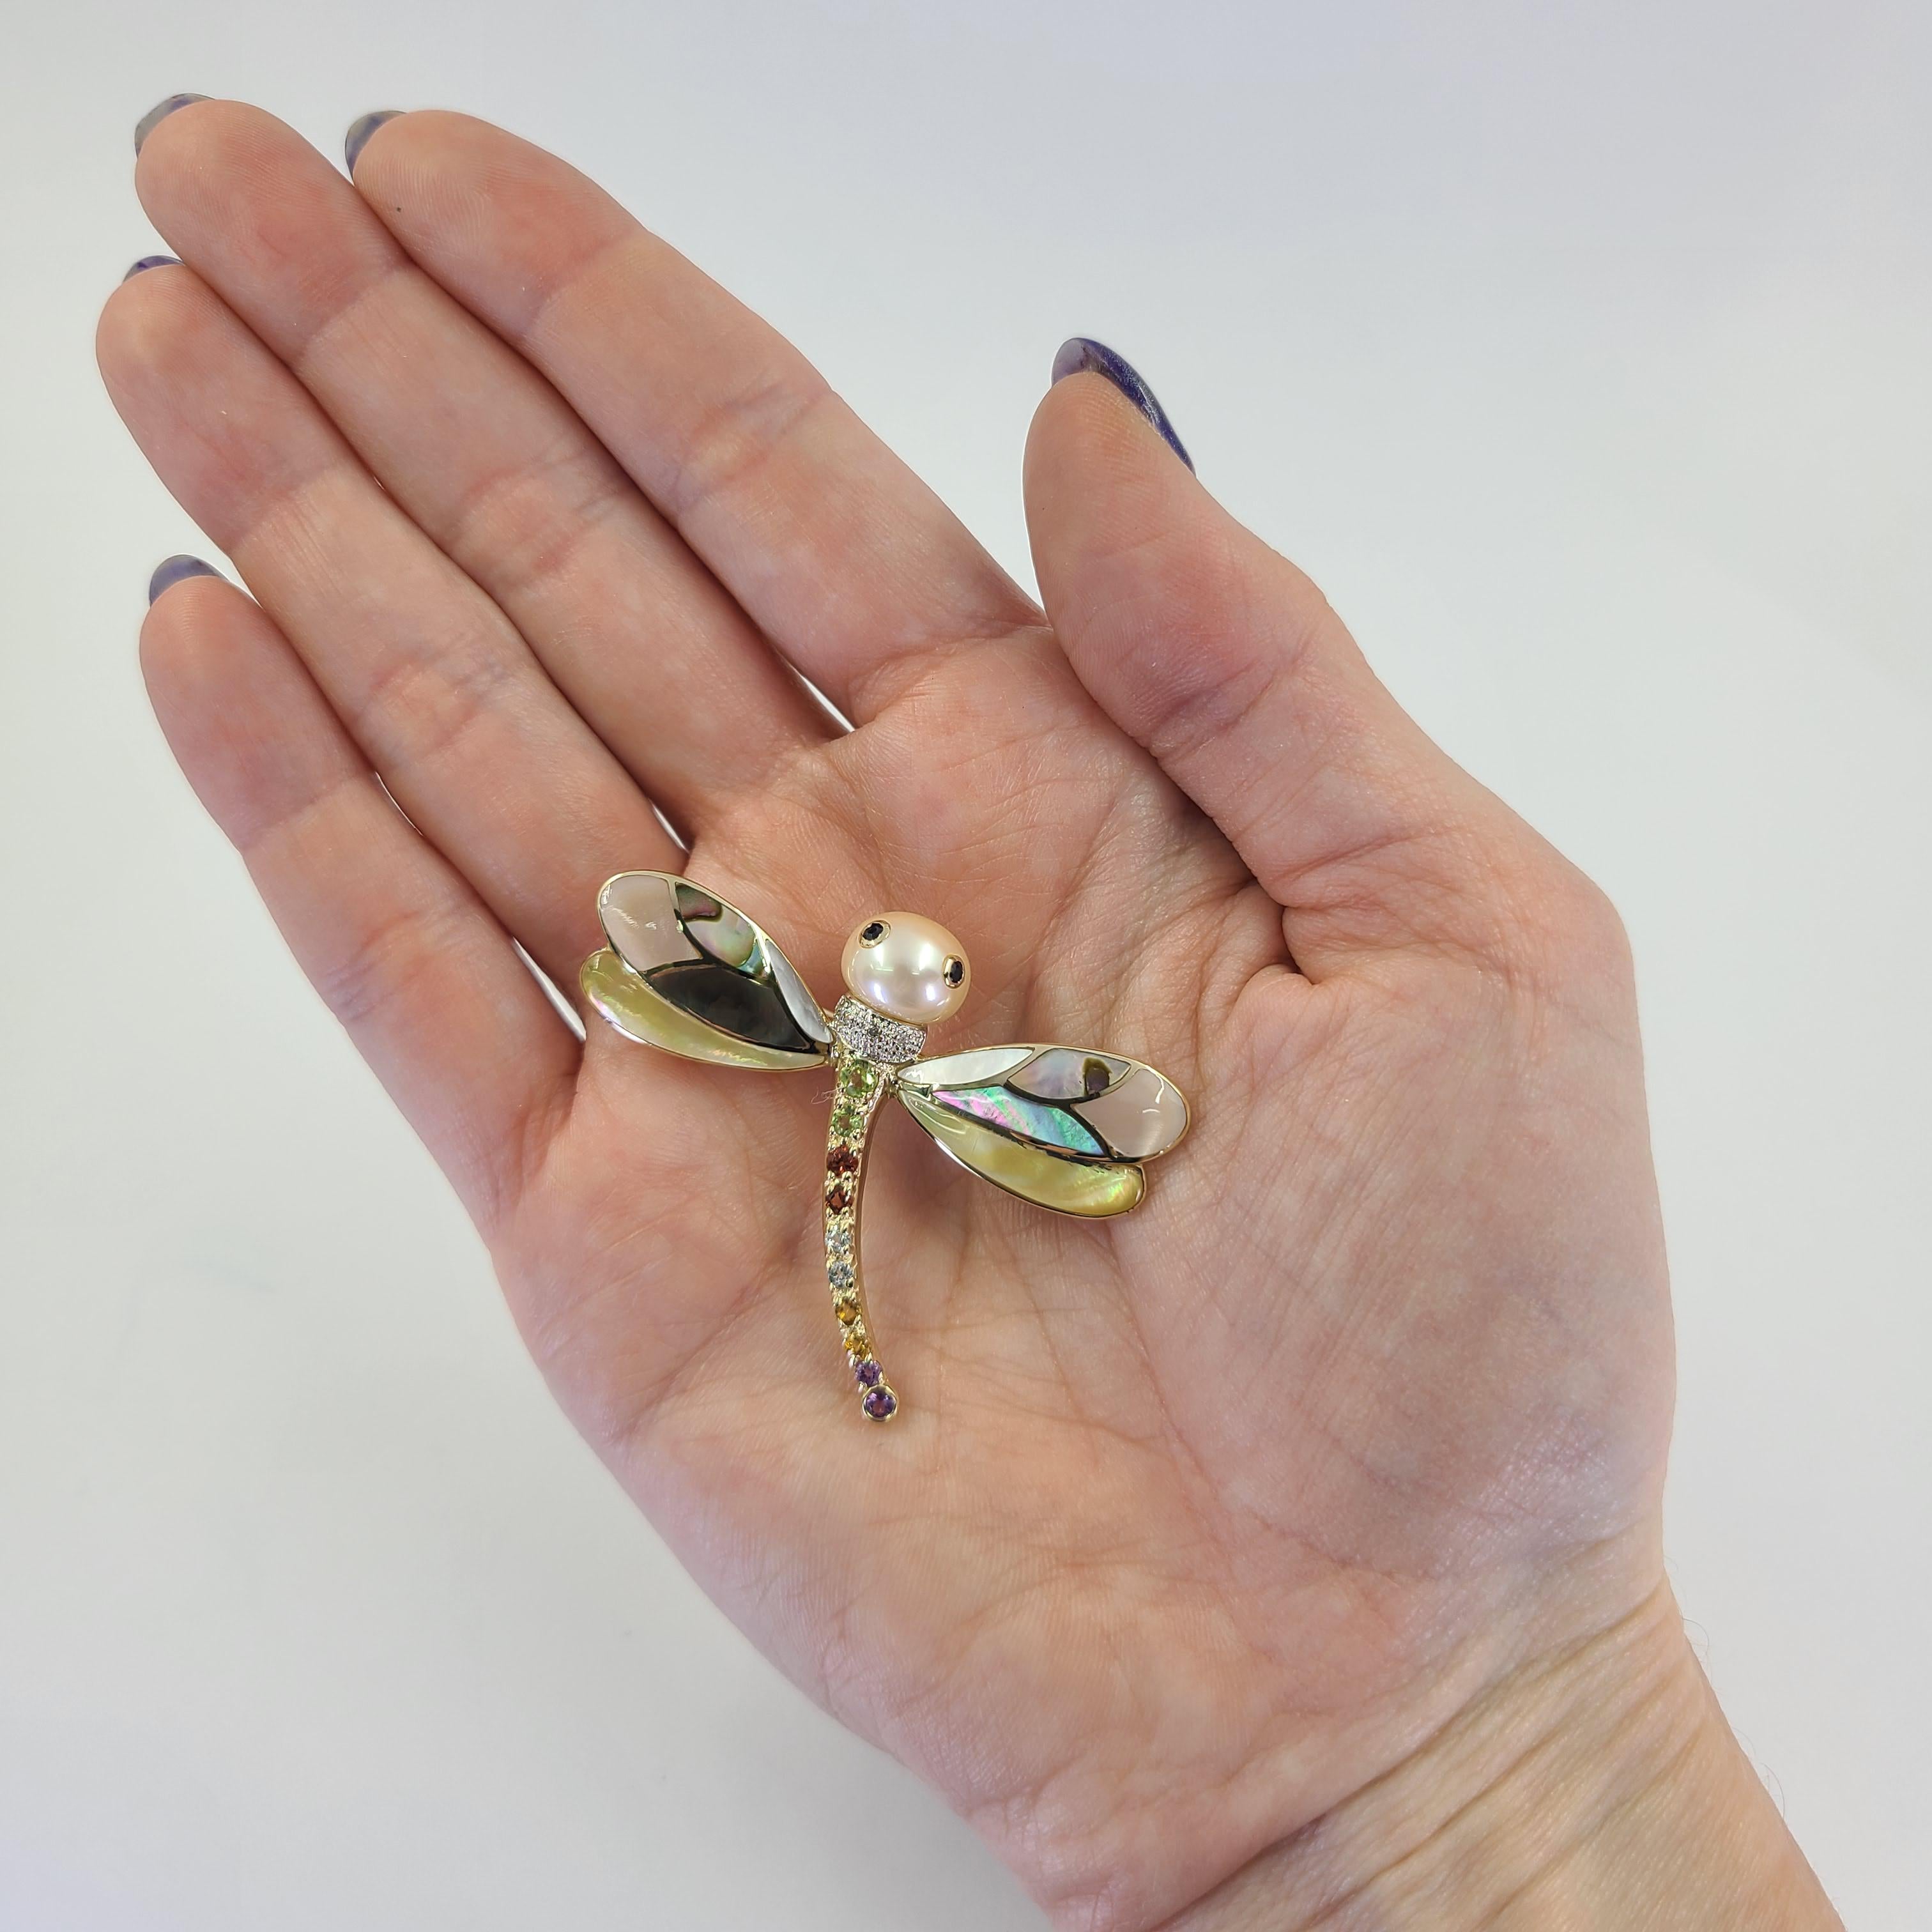 14 Karat Yellow Gold Dragonfly Pin Featuring A Cultured Pearl Head, Mother-of-Pearl Inlay Wings, and Gemstone Set Body (Diamonds, Peridot, Garnet, Blue Topaz, Citrine, and Amethyst). 2 Inches Wide By 1.5 Inches Long. Finished Weight Is 6.0 Grams.